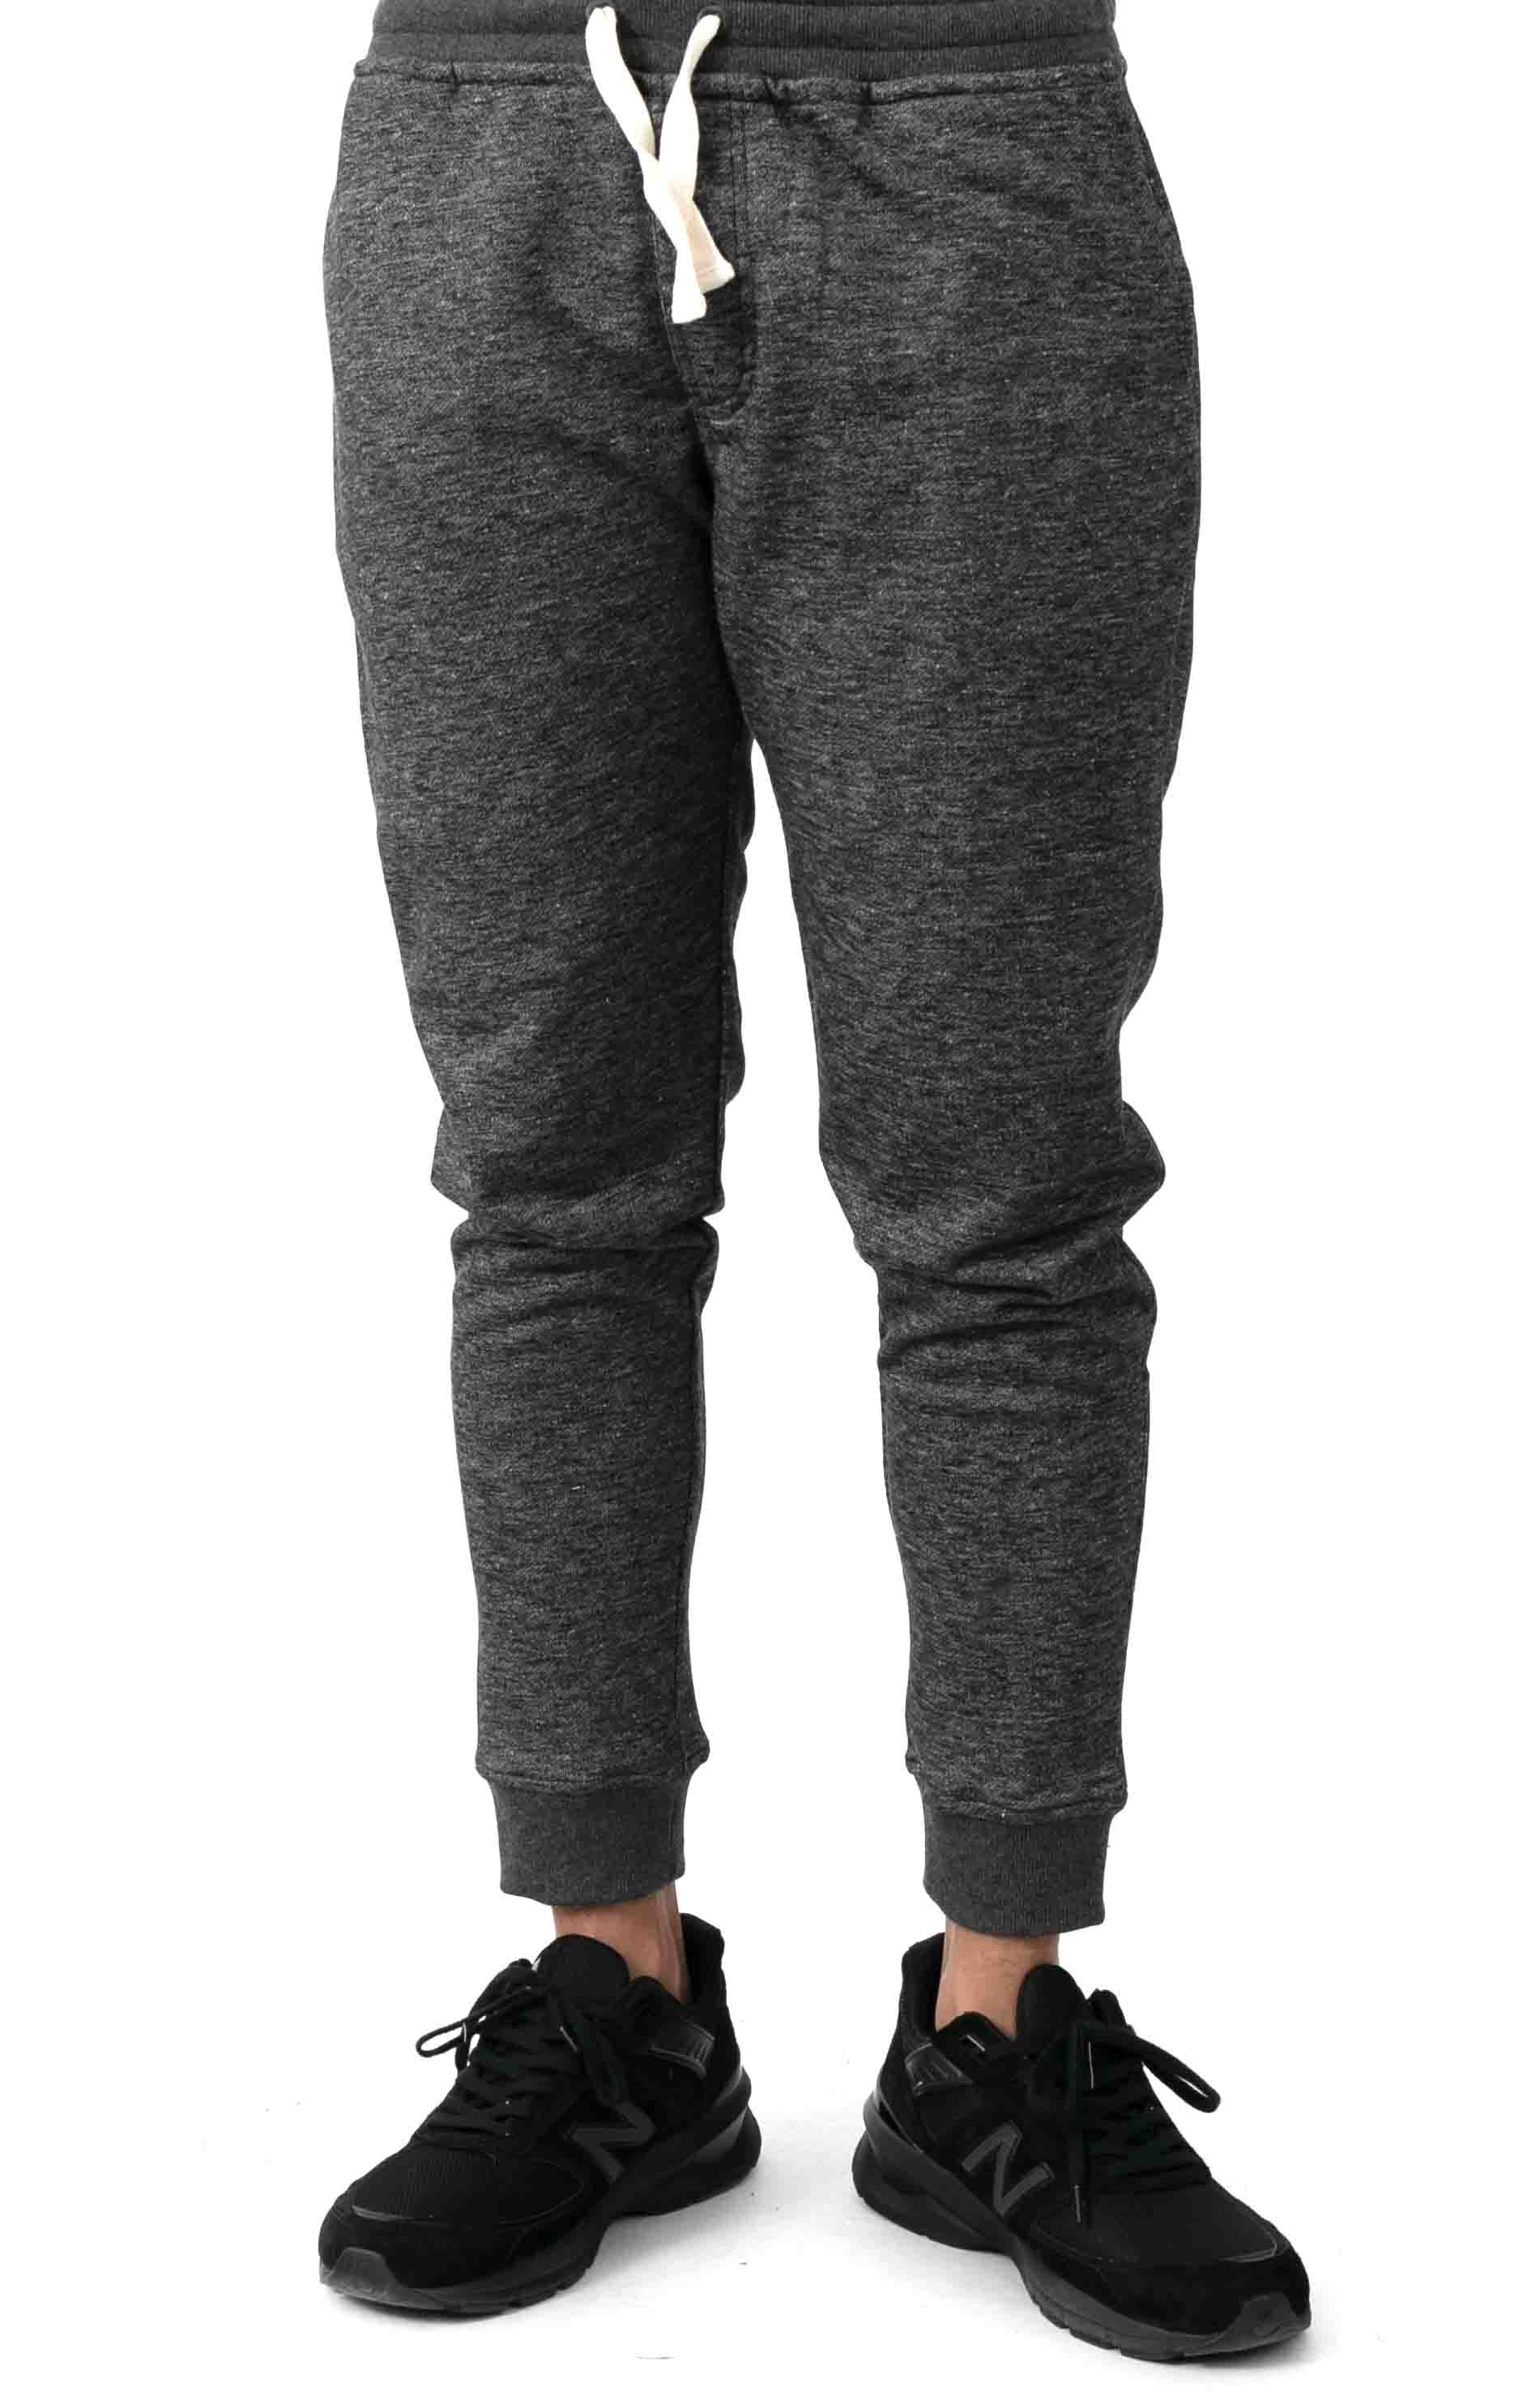 Primary Tracksuit Pant